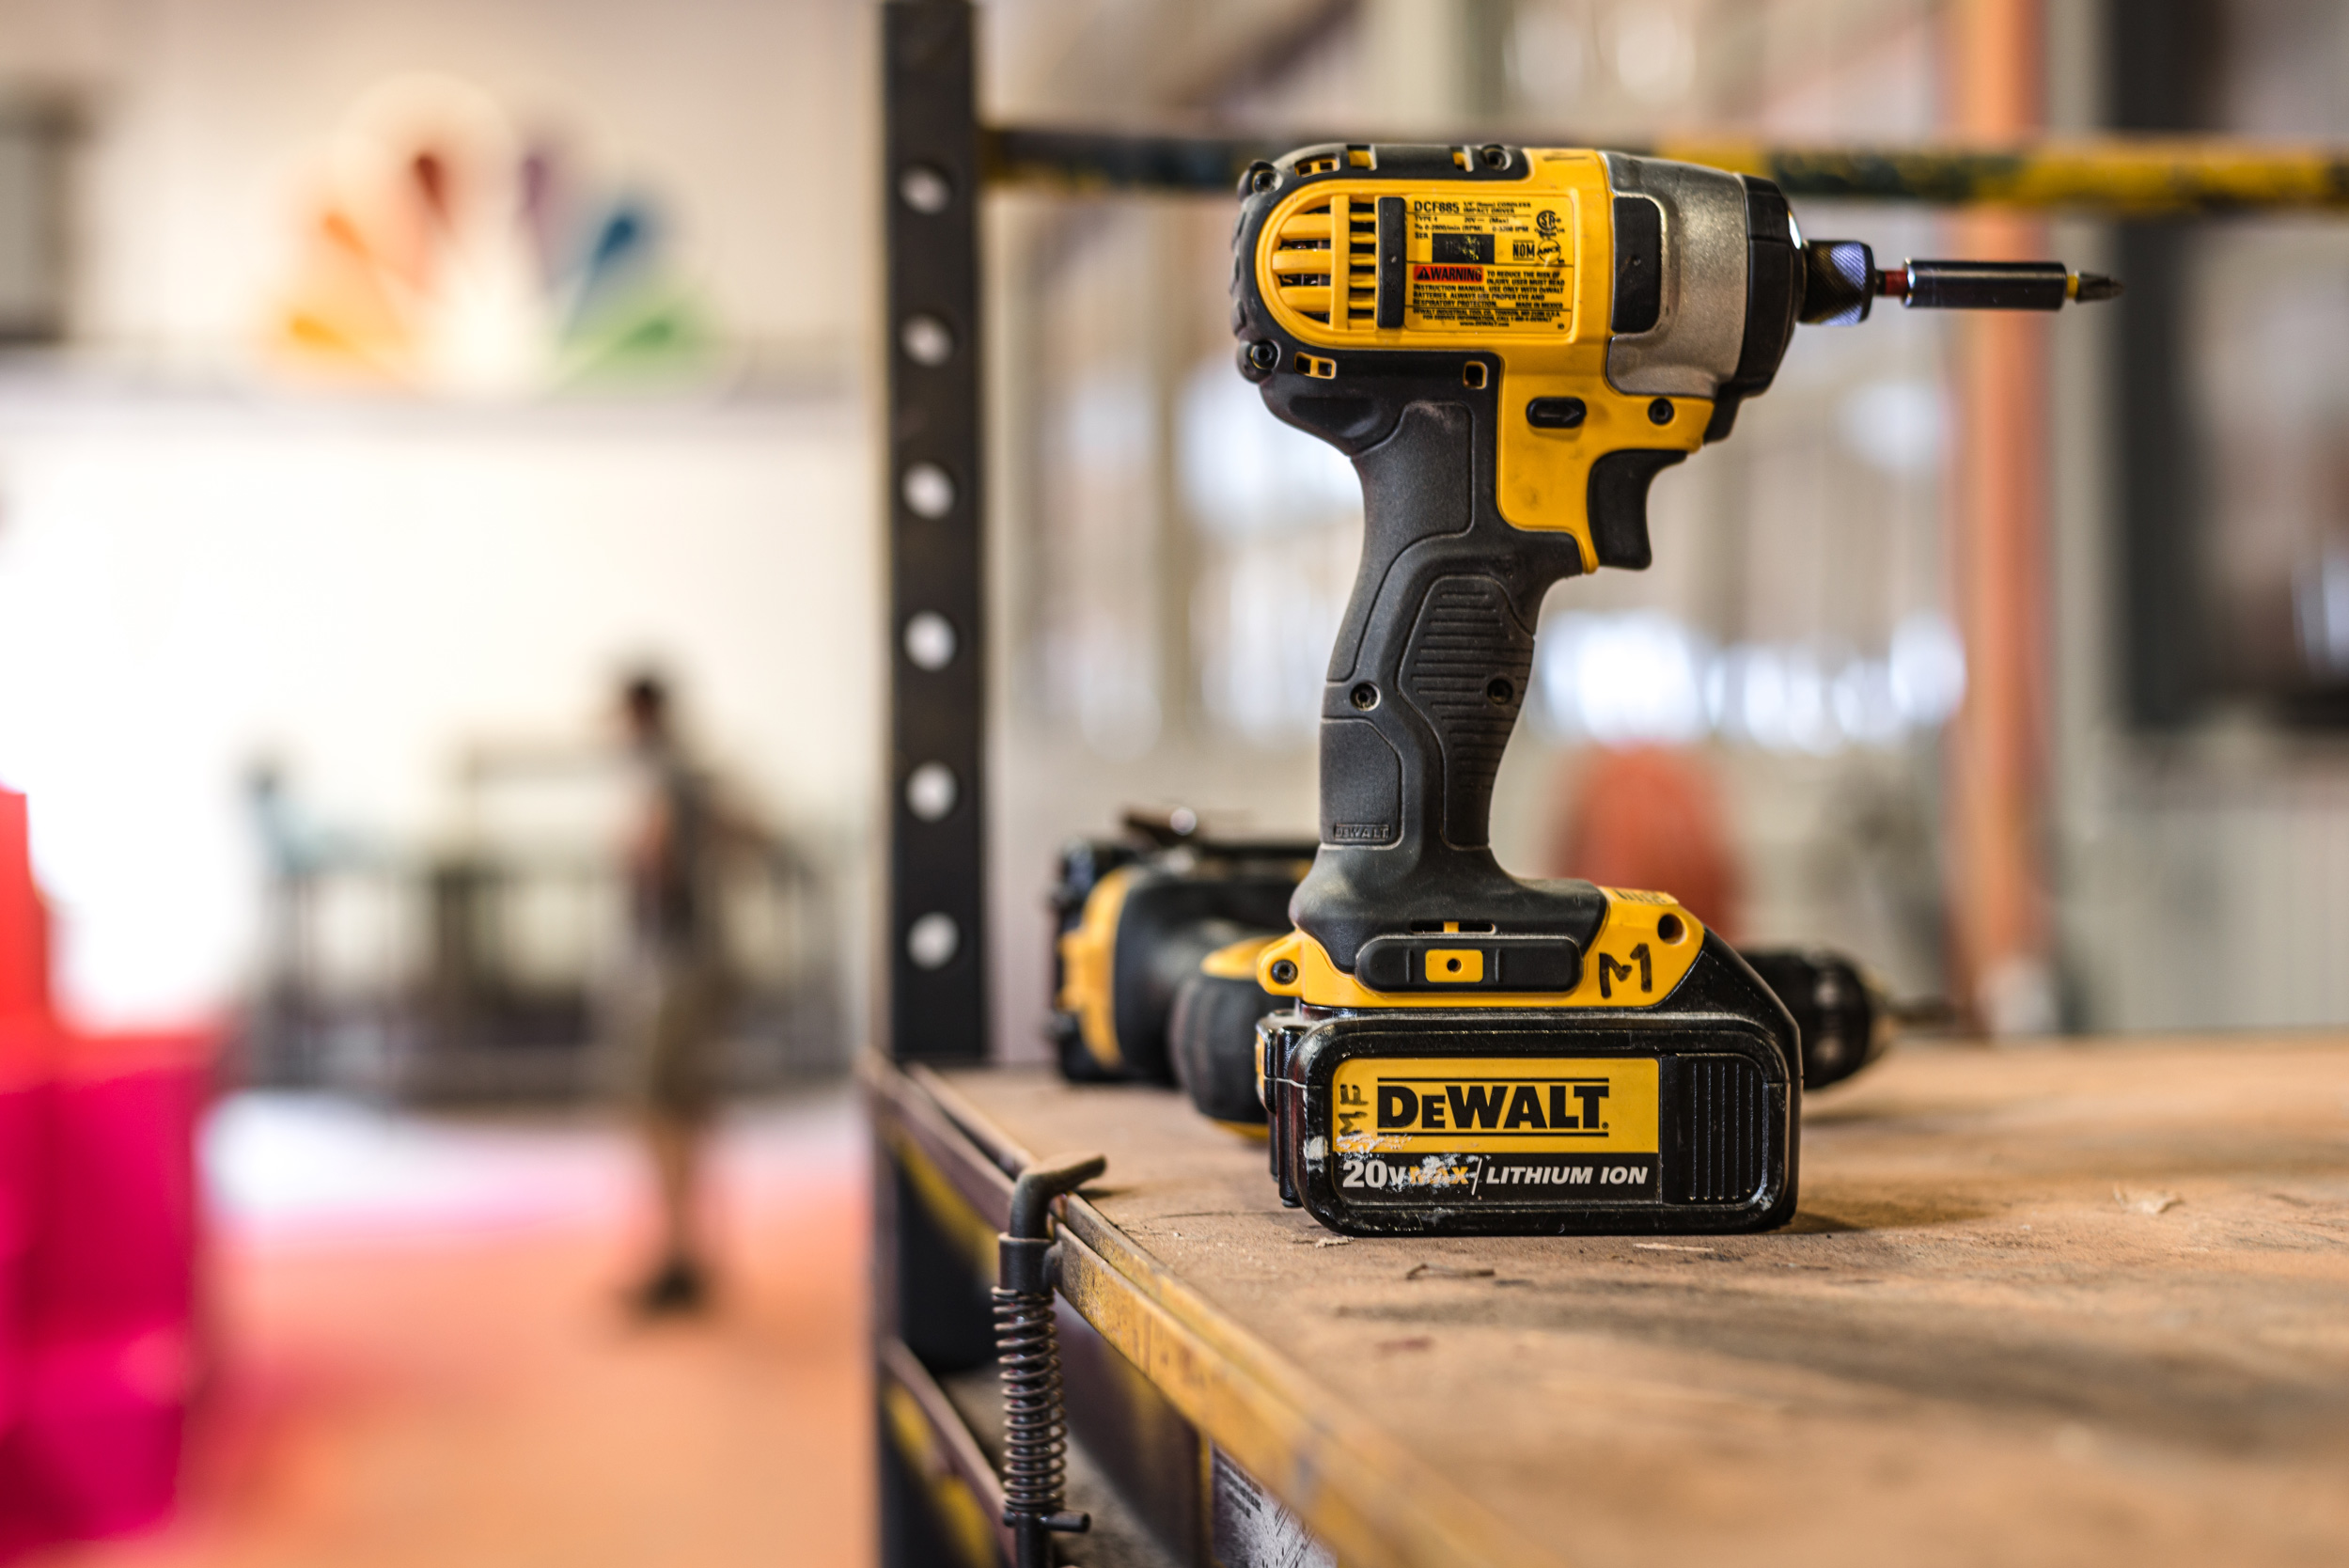 Dewalt drill in workshop with people in background, construction